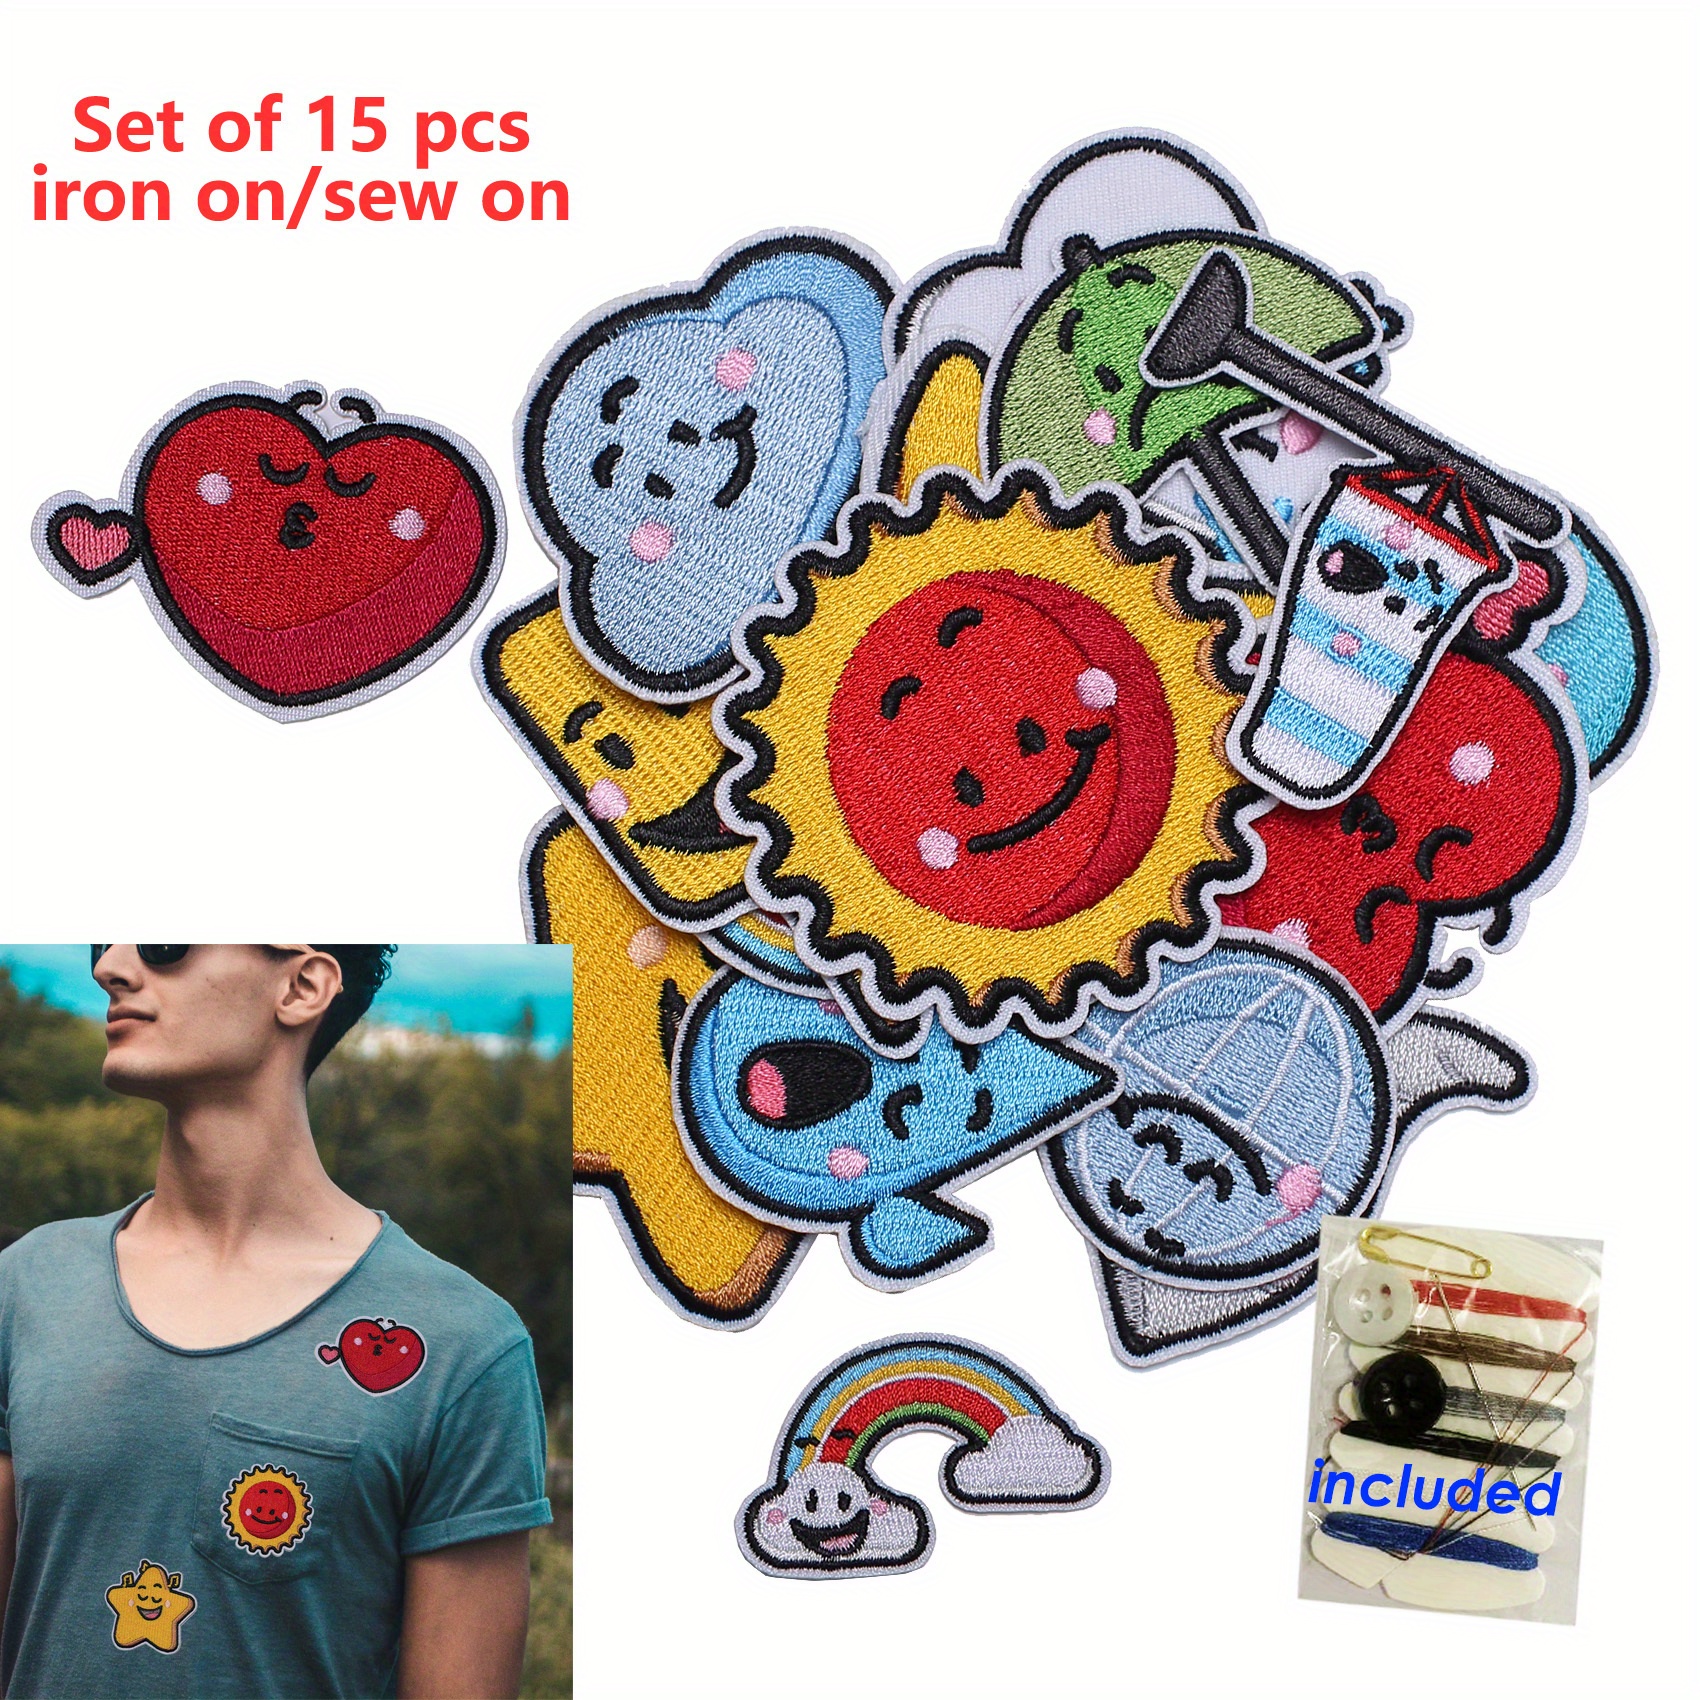 Iron- On Jeans Patches, T Shirt Patches Appliques